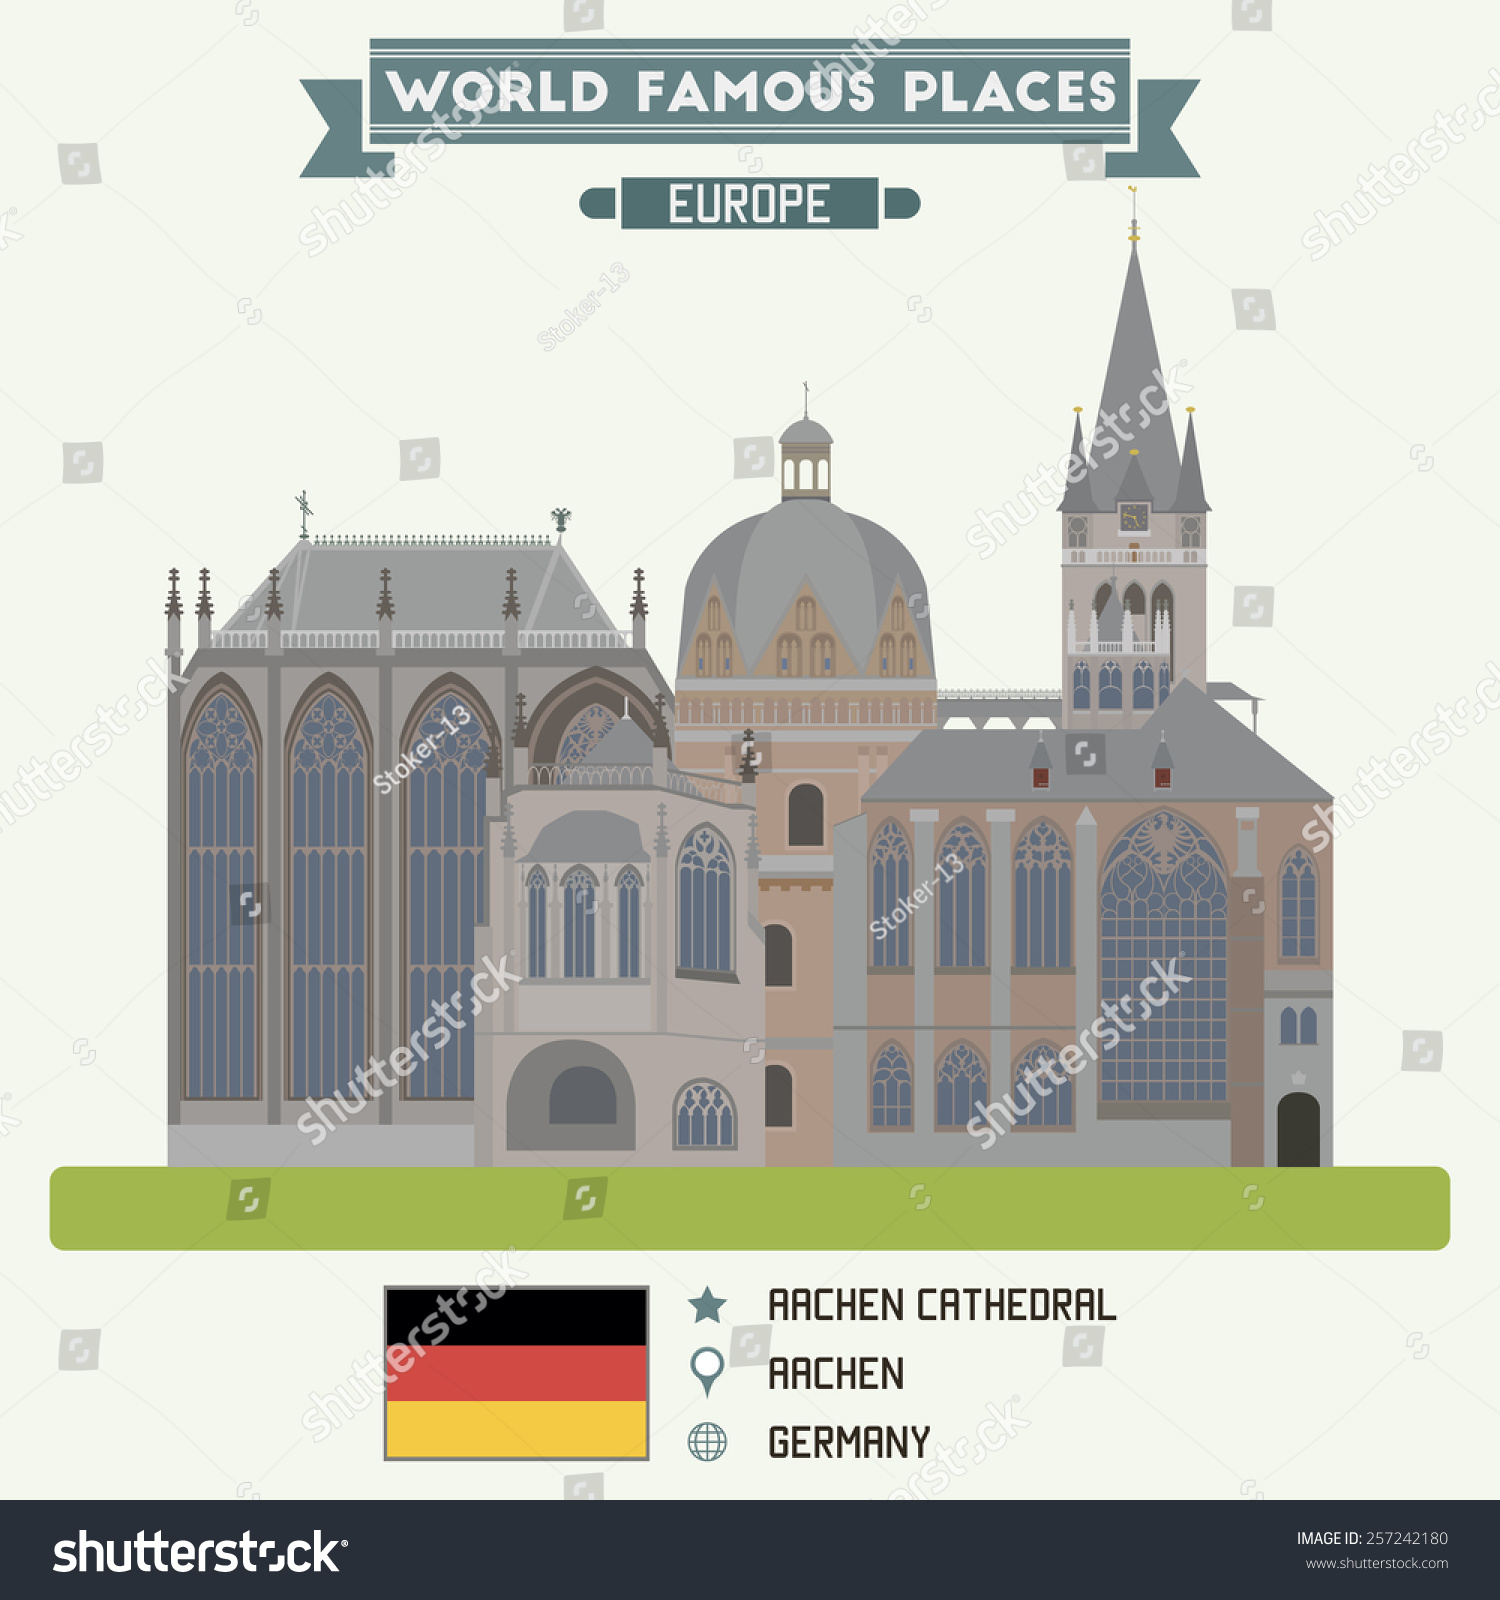 SVG of Aacen Cathedral. Germany famous places svg